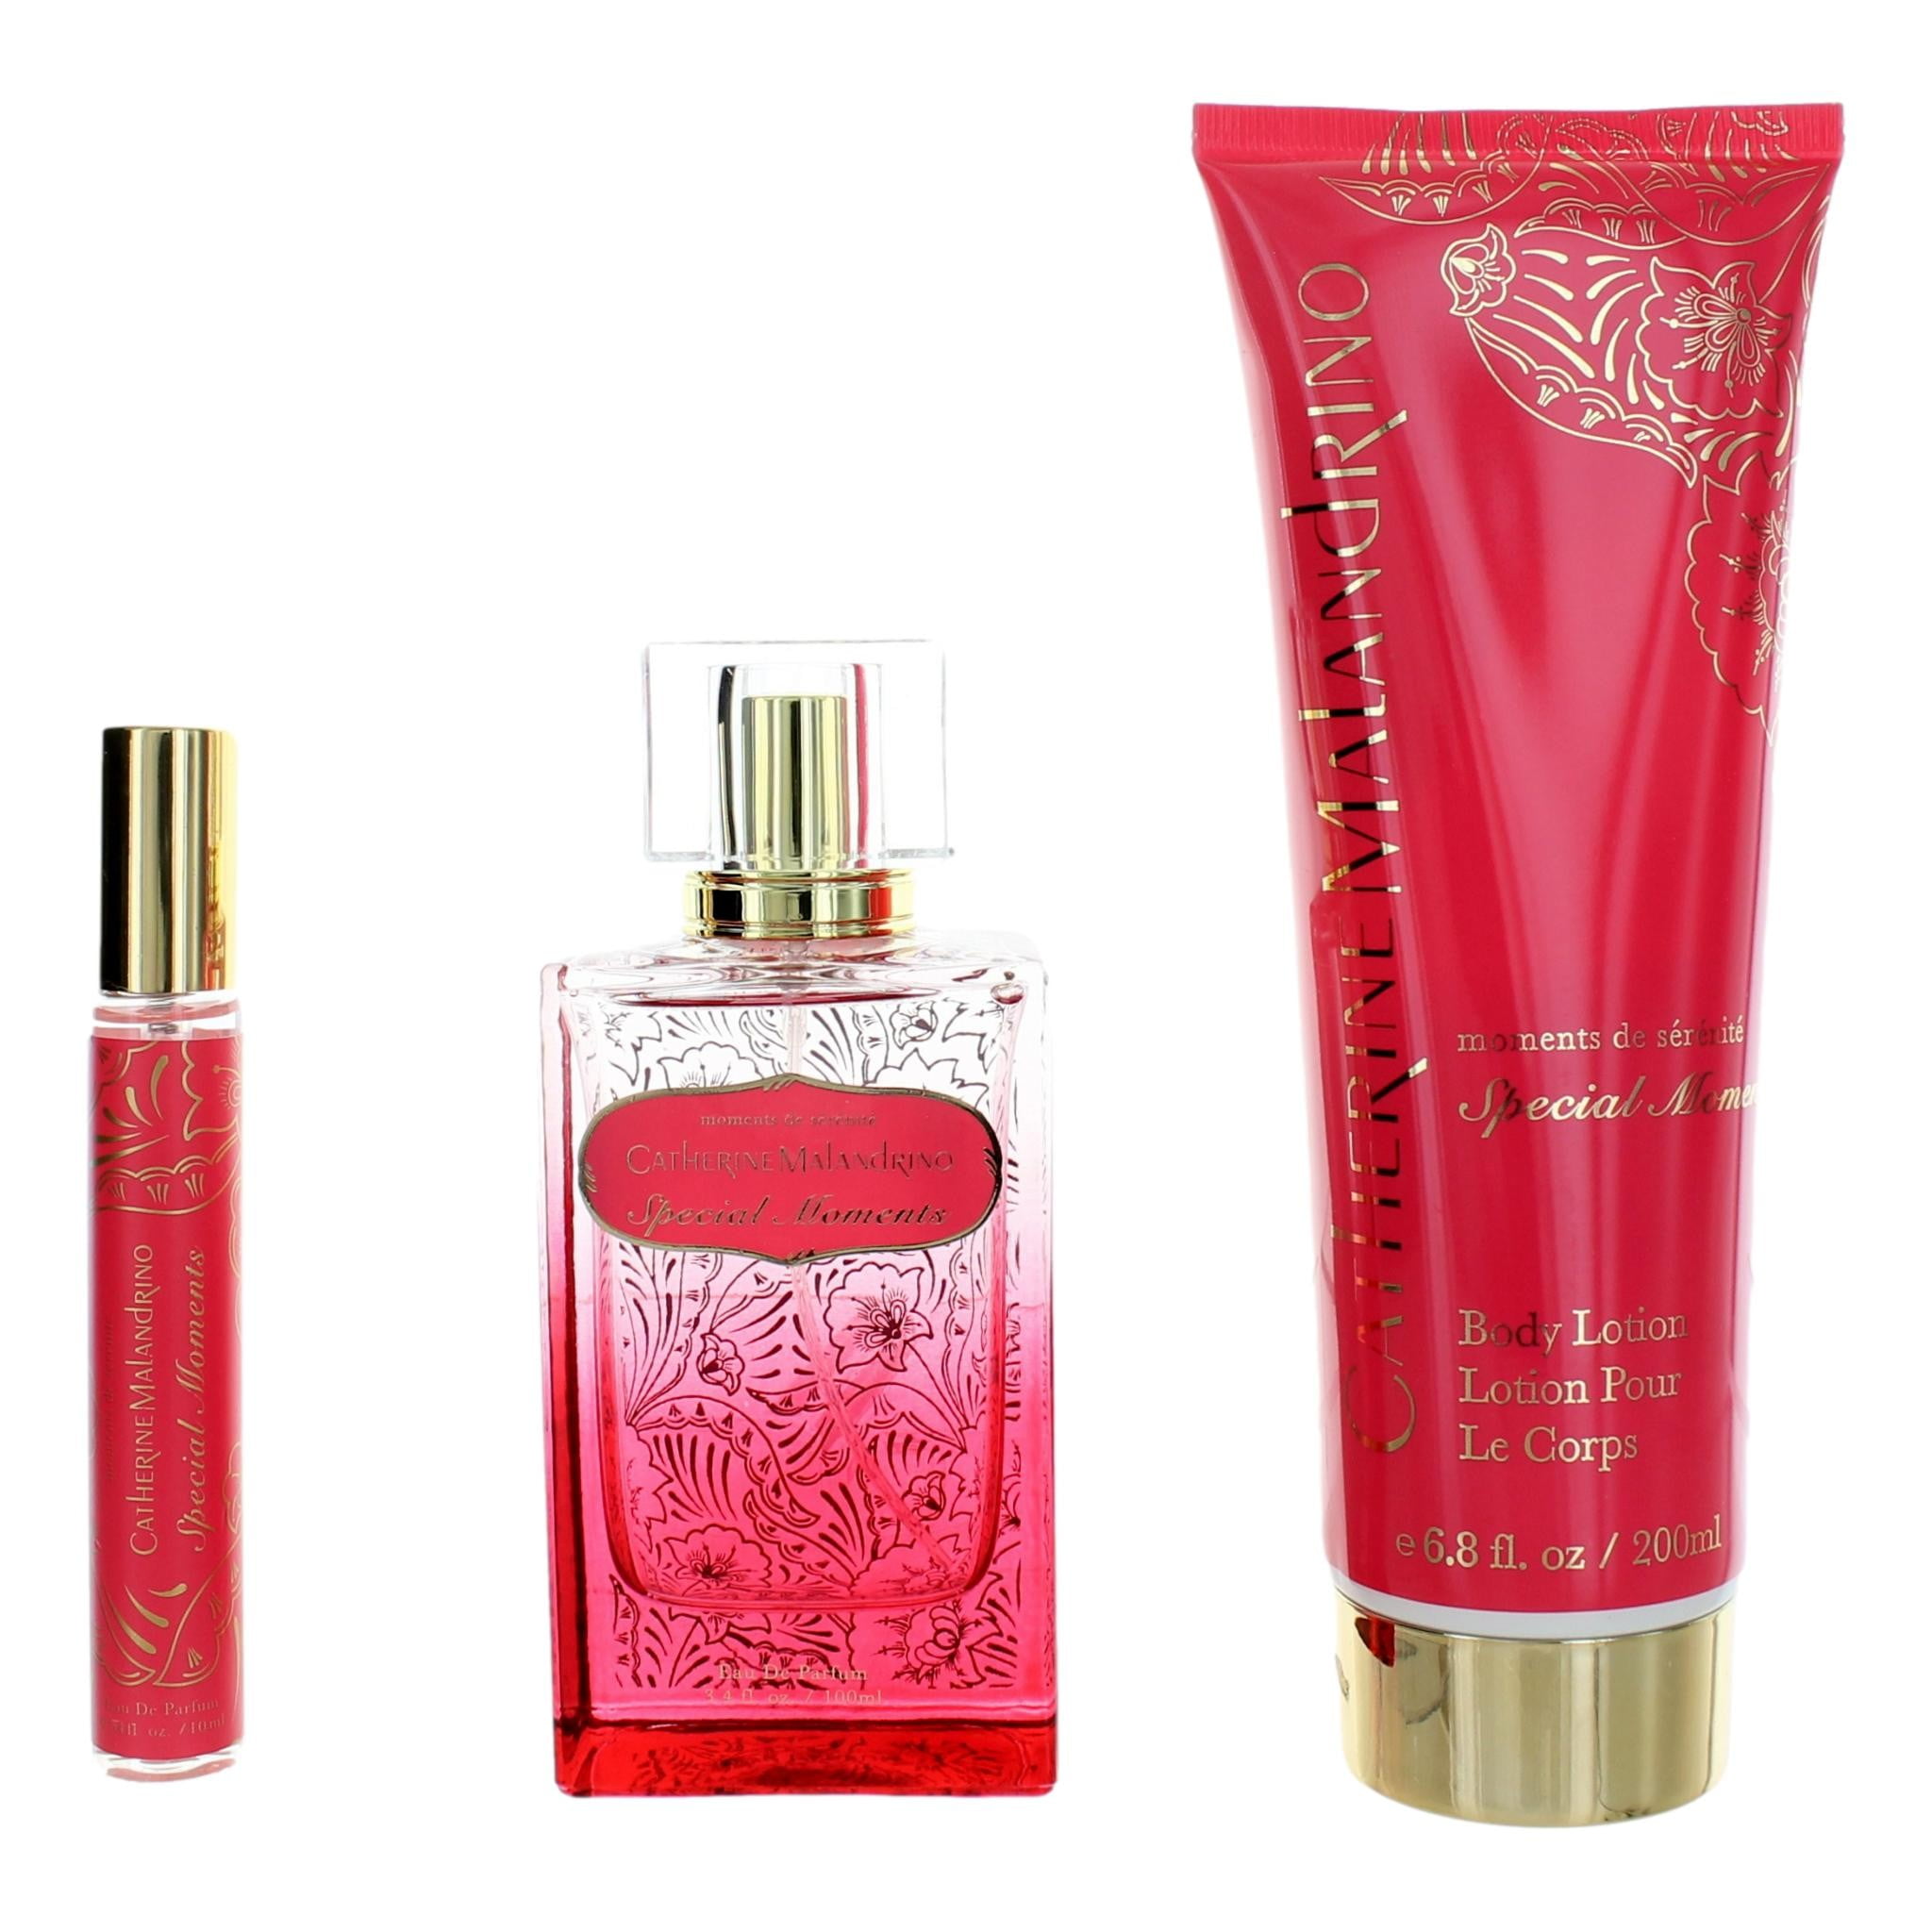 3 In 1 Gift Box Women Perfume Travel Set Lady 75ML NoCoco Mademoiselle  Perfumes Kit For Woman Longlasting Charmin9501976 From Ty4y, $36.22